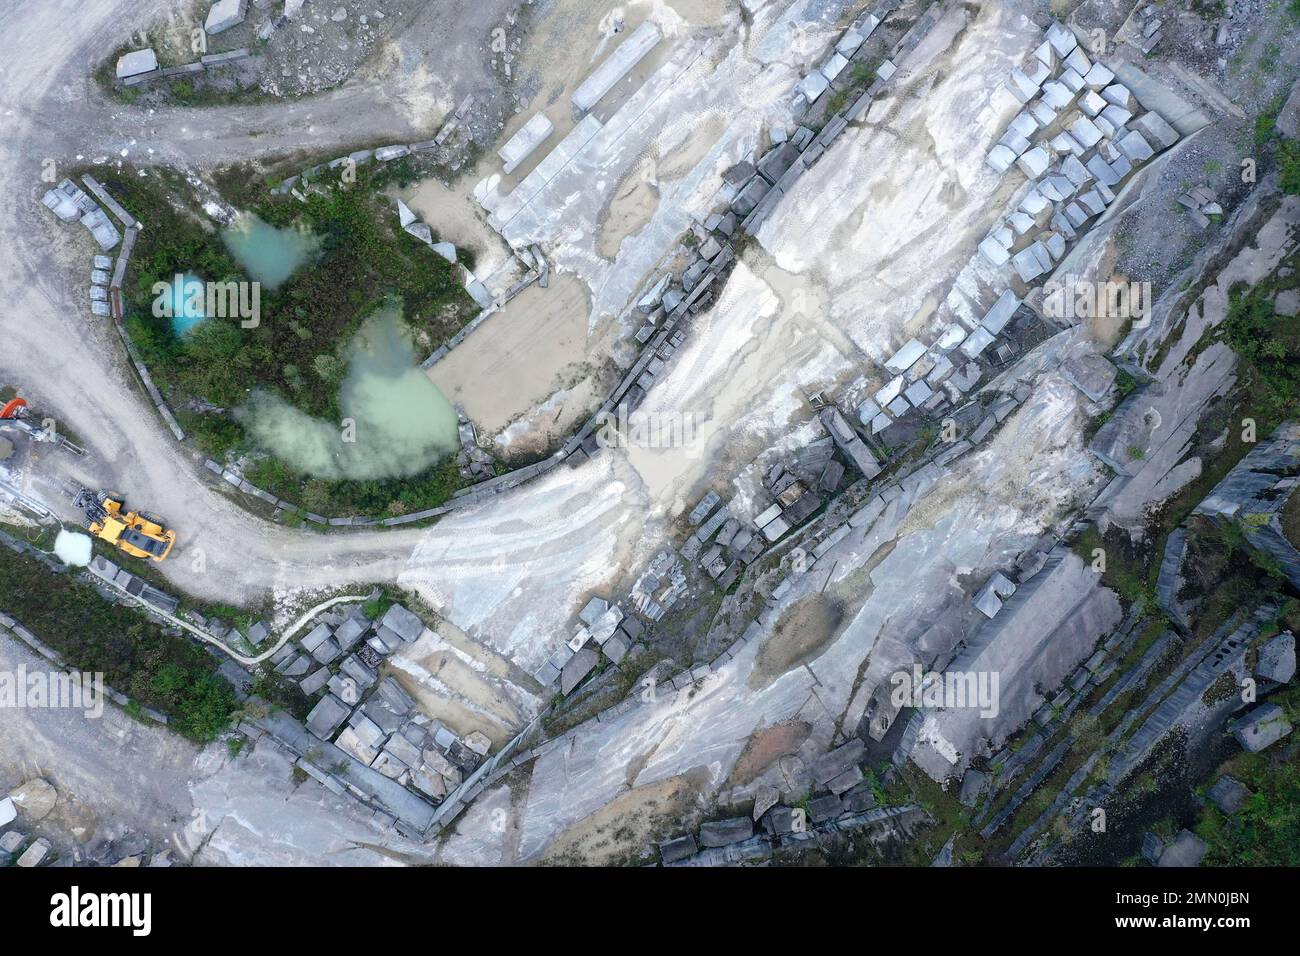 France, Pyrenees Atlantiques, Bearn, Arudy, aerial view of the installations of a marble quarry Stock Photo